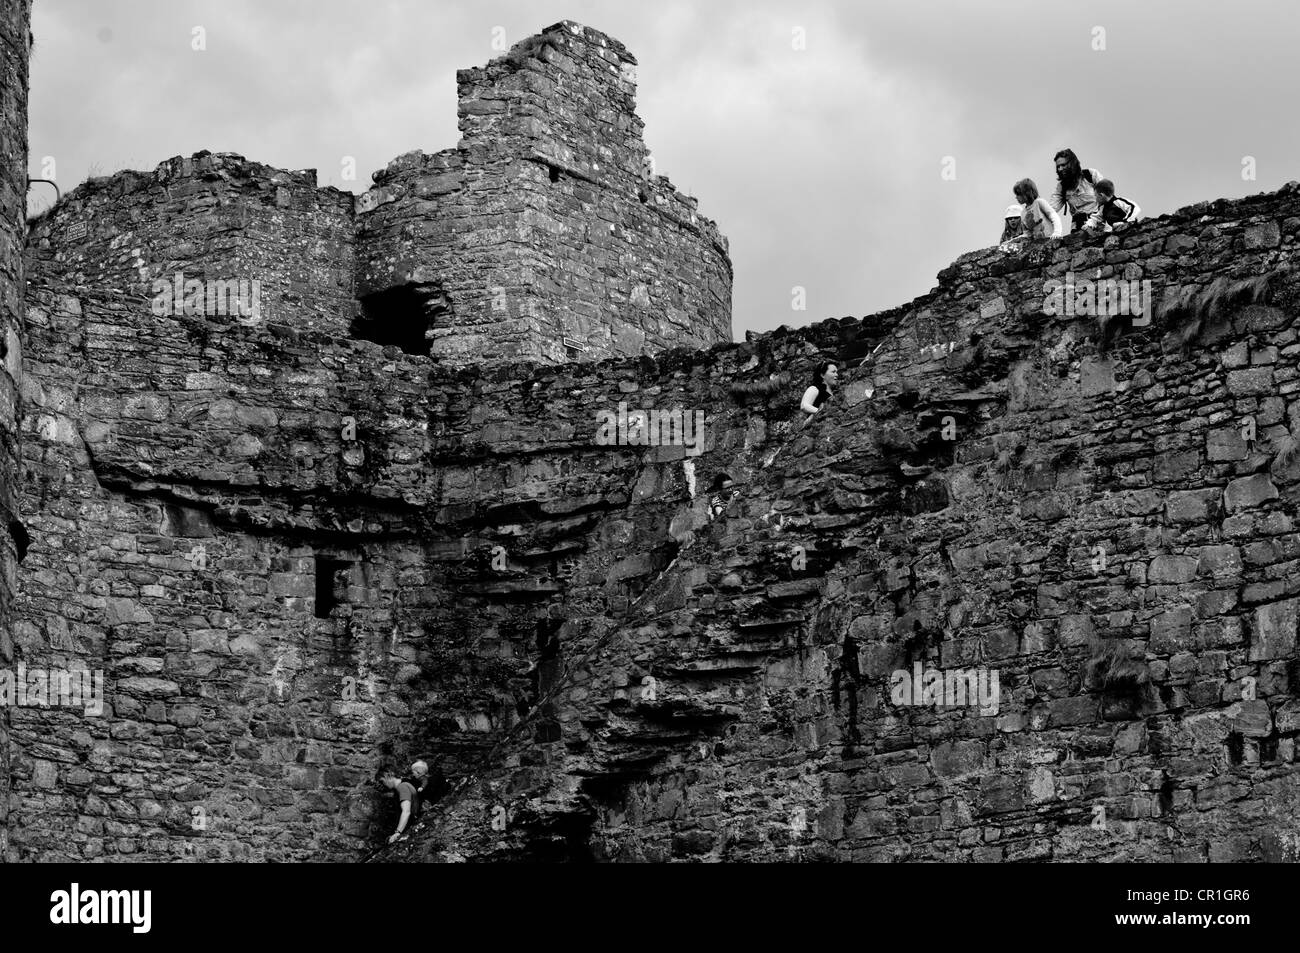 Thick Castle Walls Stock Photos & Thick Castle Walls Stock Images - Alamy